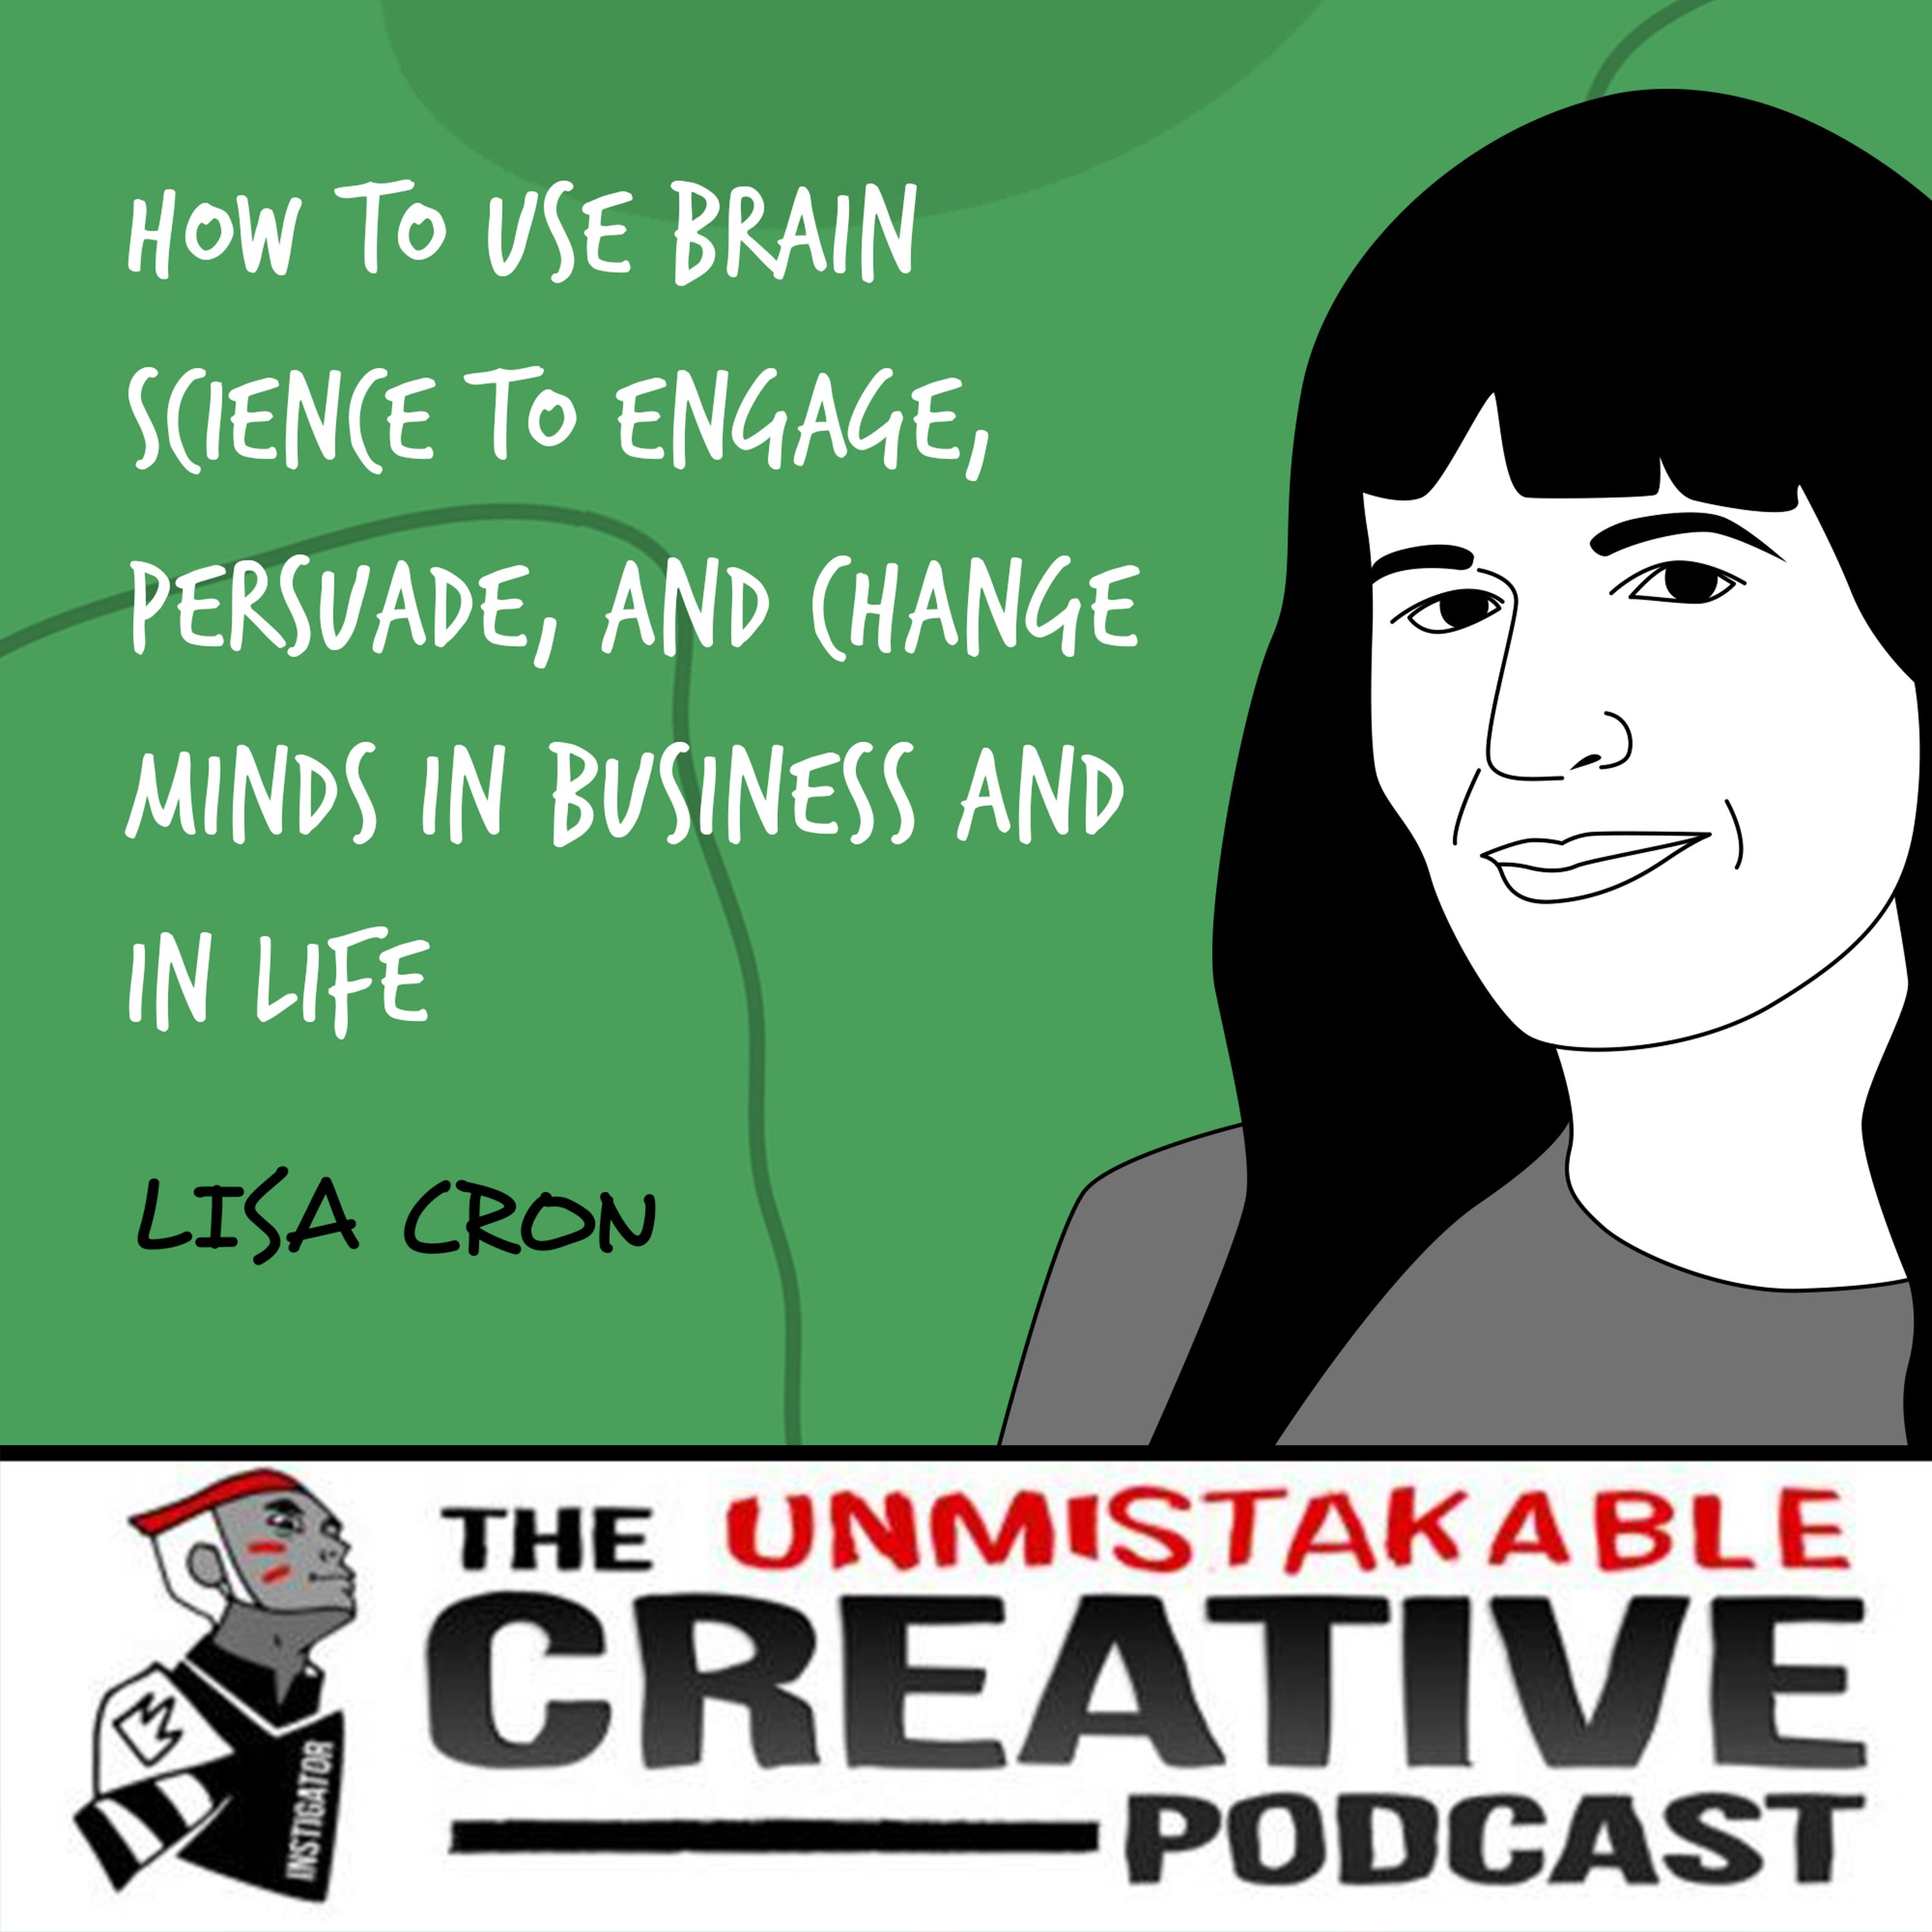 Lisa Cron | How to Use Brain Science to Engage, Persuade, and Change Minds in Business and in Life Image